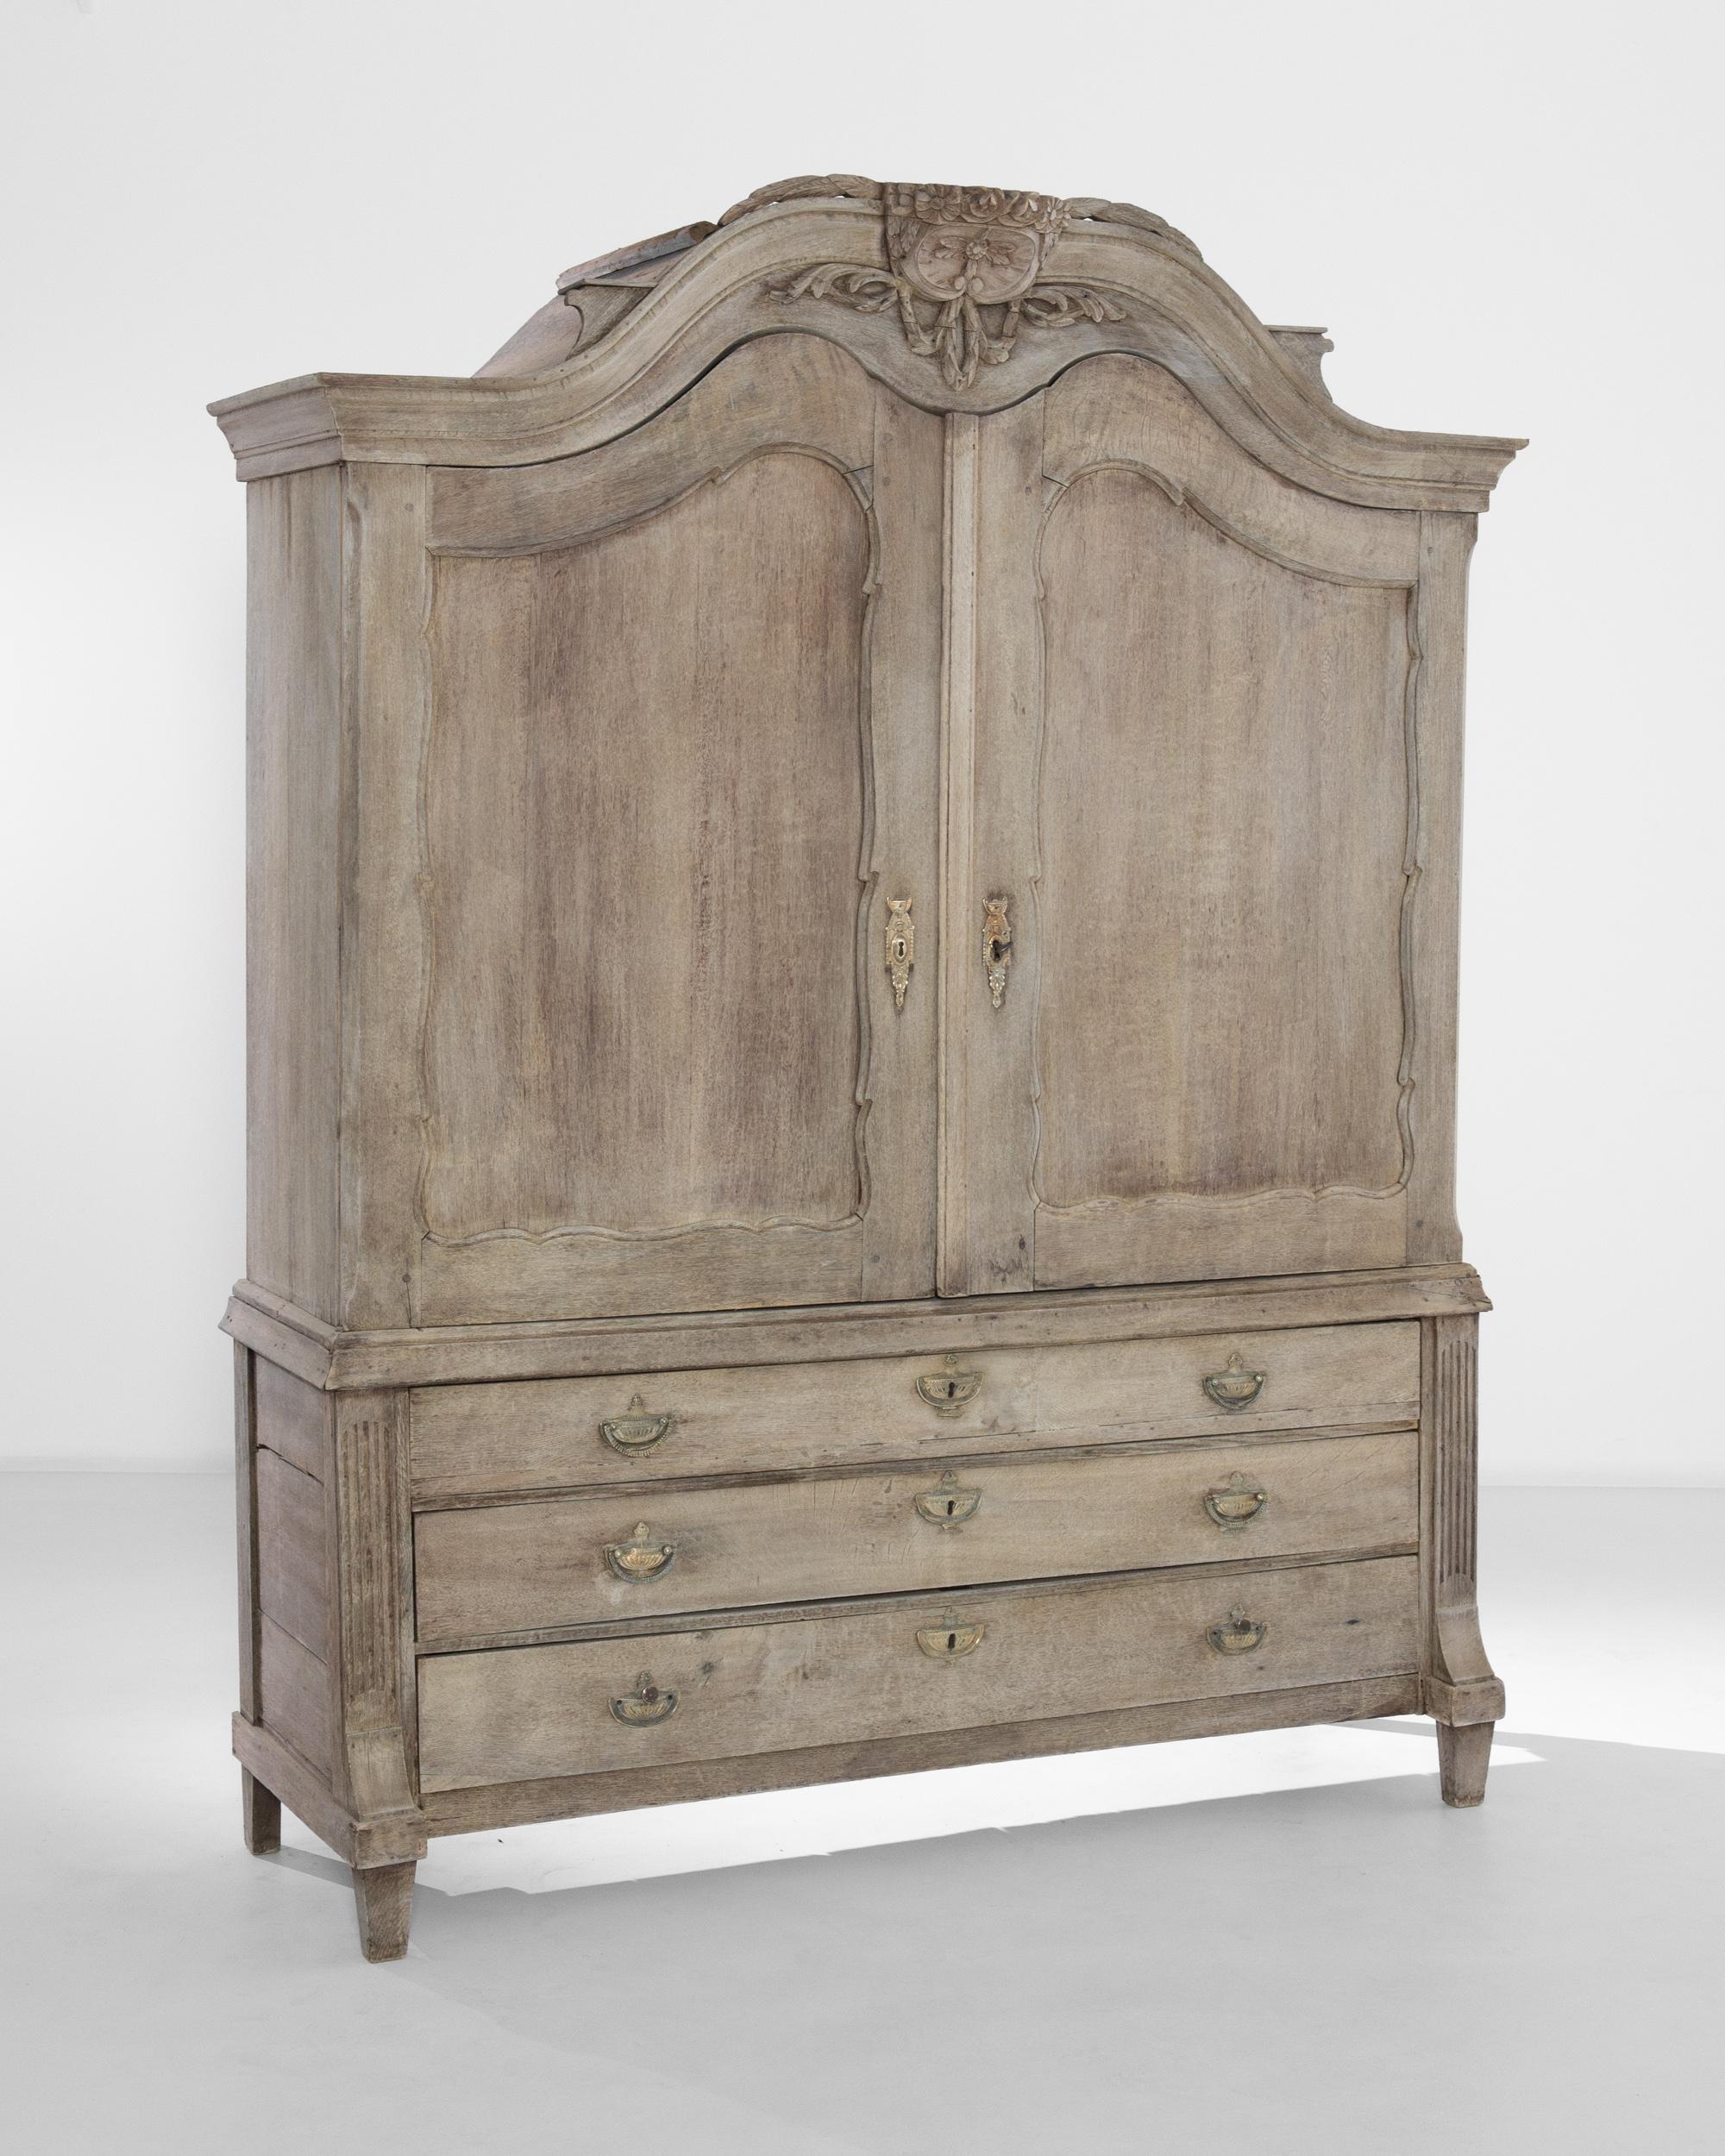 A bleached oak cabinet from The Netherlands, produced circa 1800. A massive wooden chest standing nearly seven feet tall, featuring an arched, locking double door cabinet of three shelves, and three sliding drawers with brass escutcheons and hanging